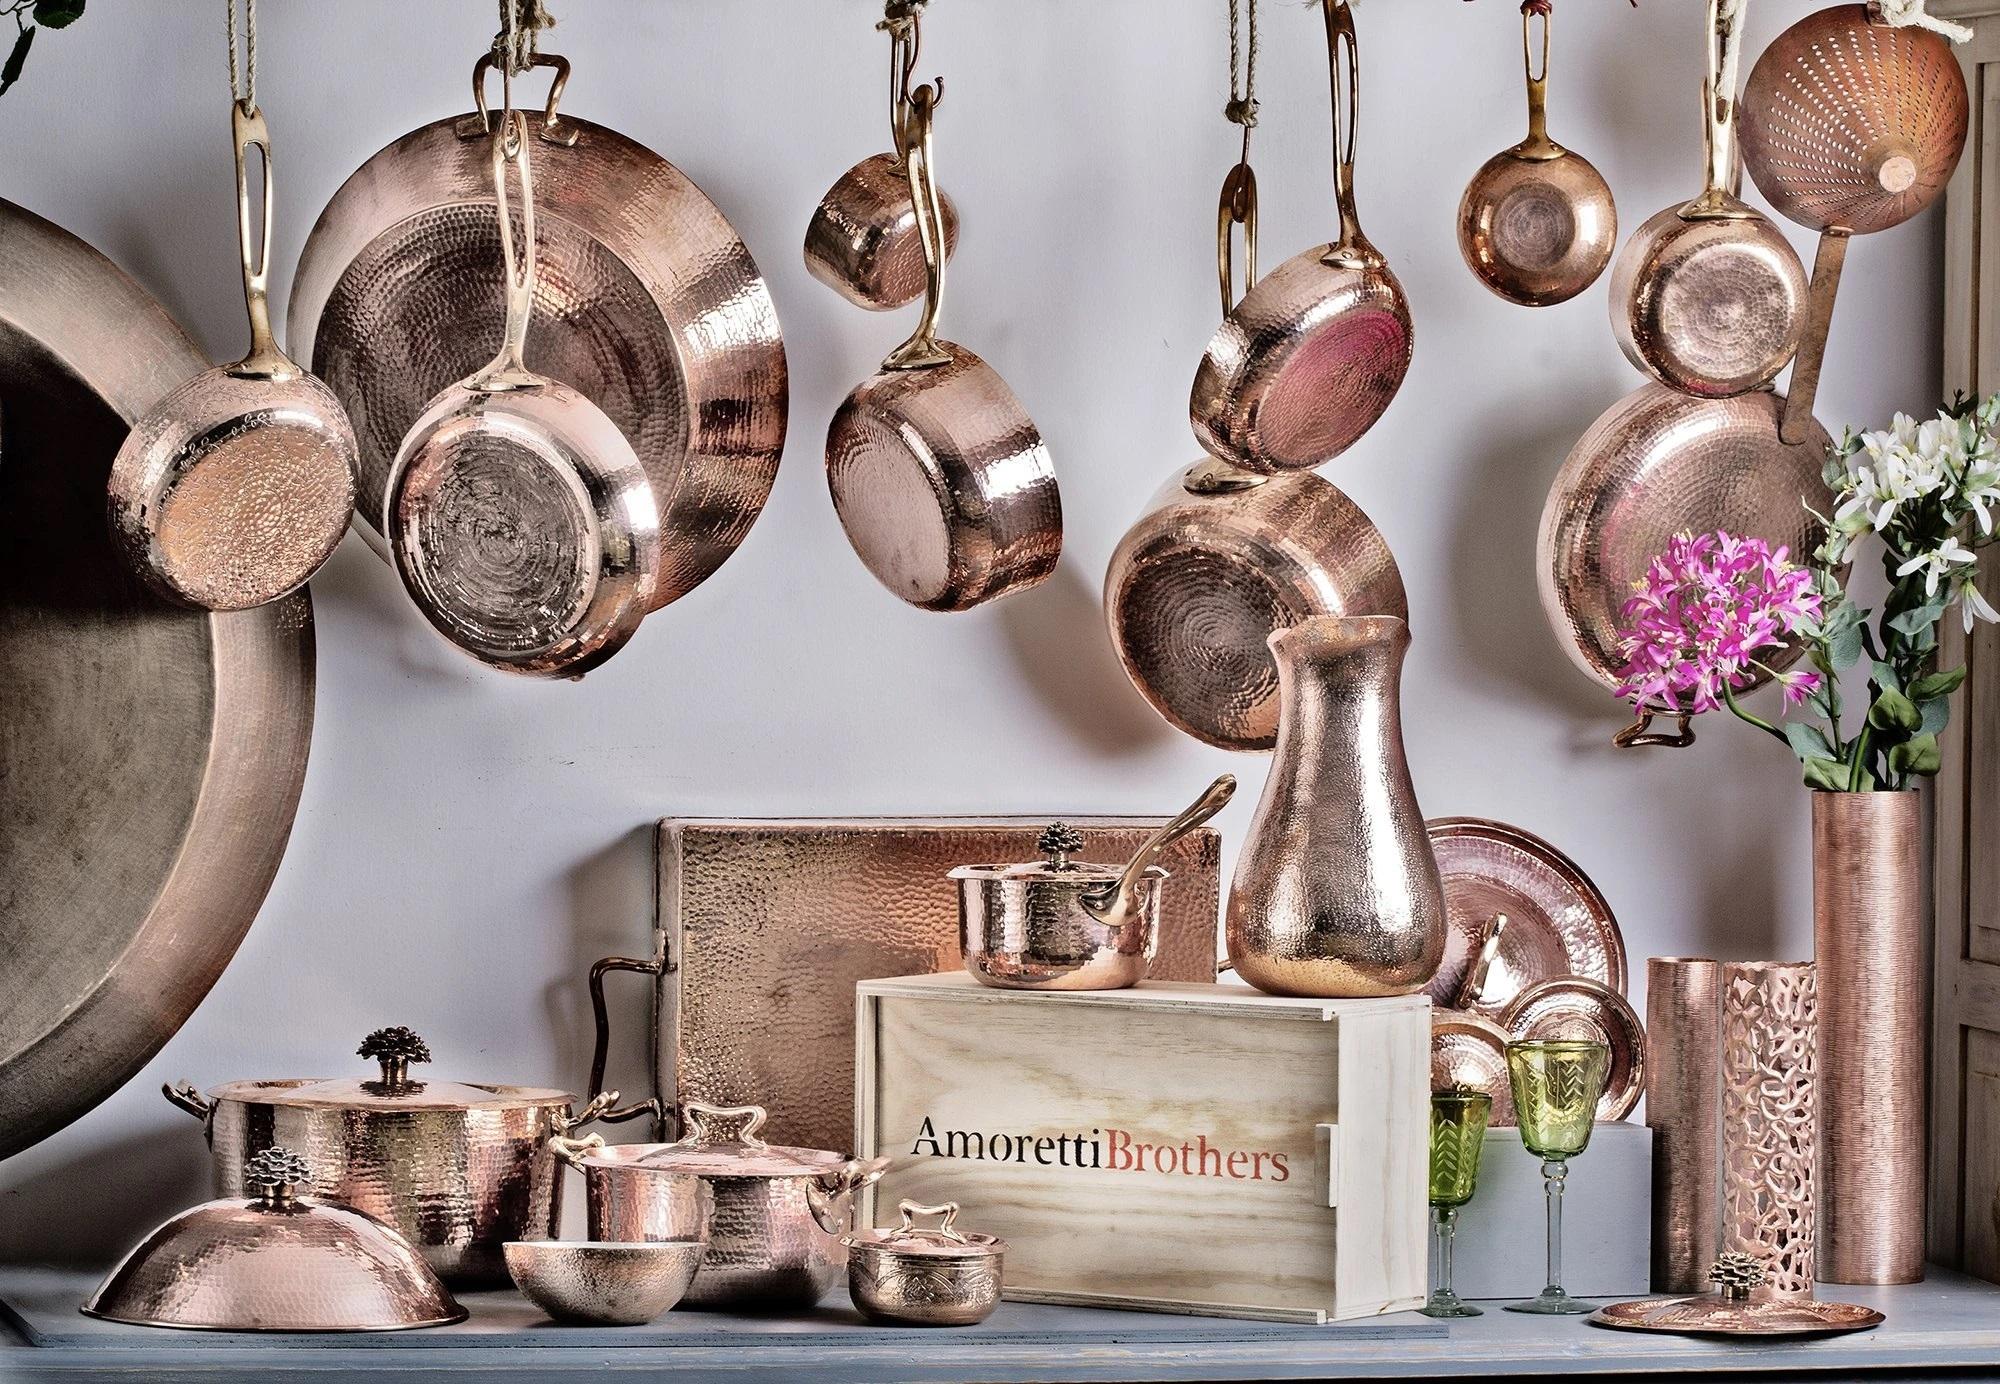 Hammered Amoretti Brothers Copper Cookware Set of 11, Standard For Sale